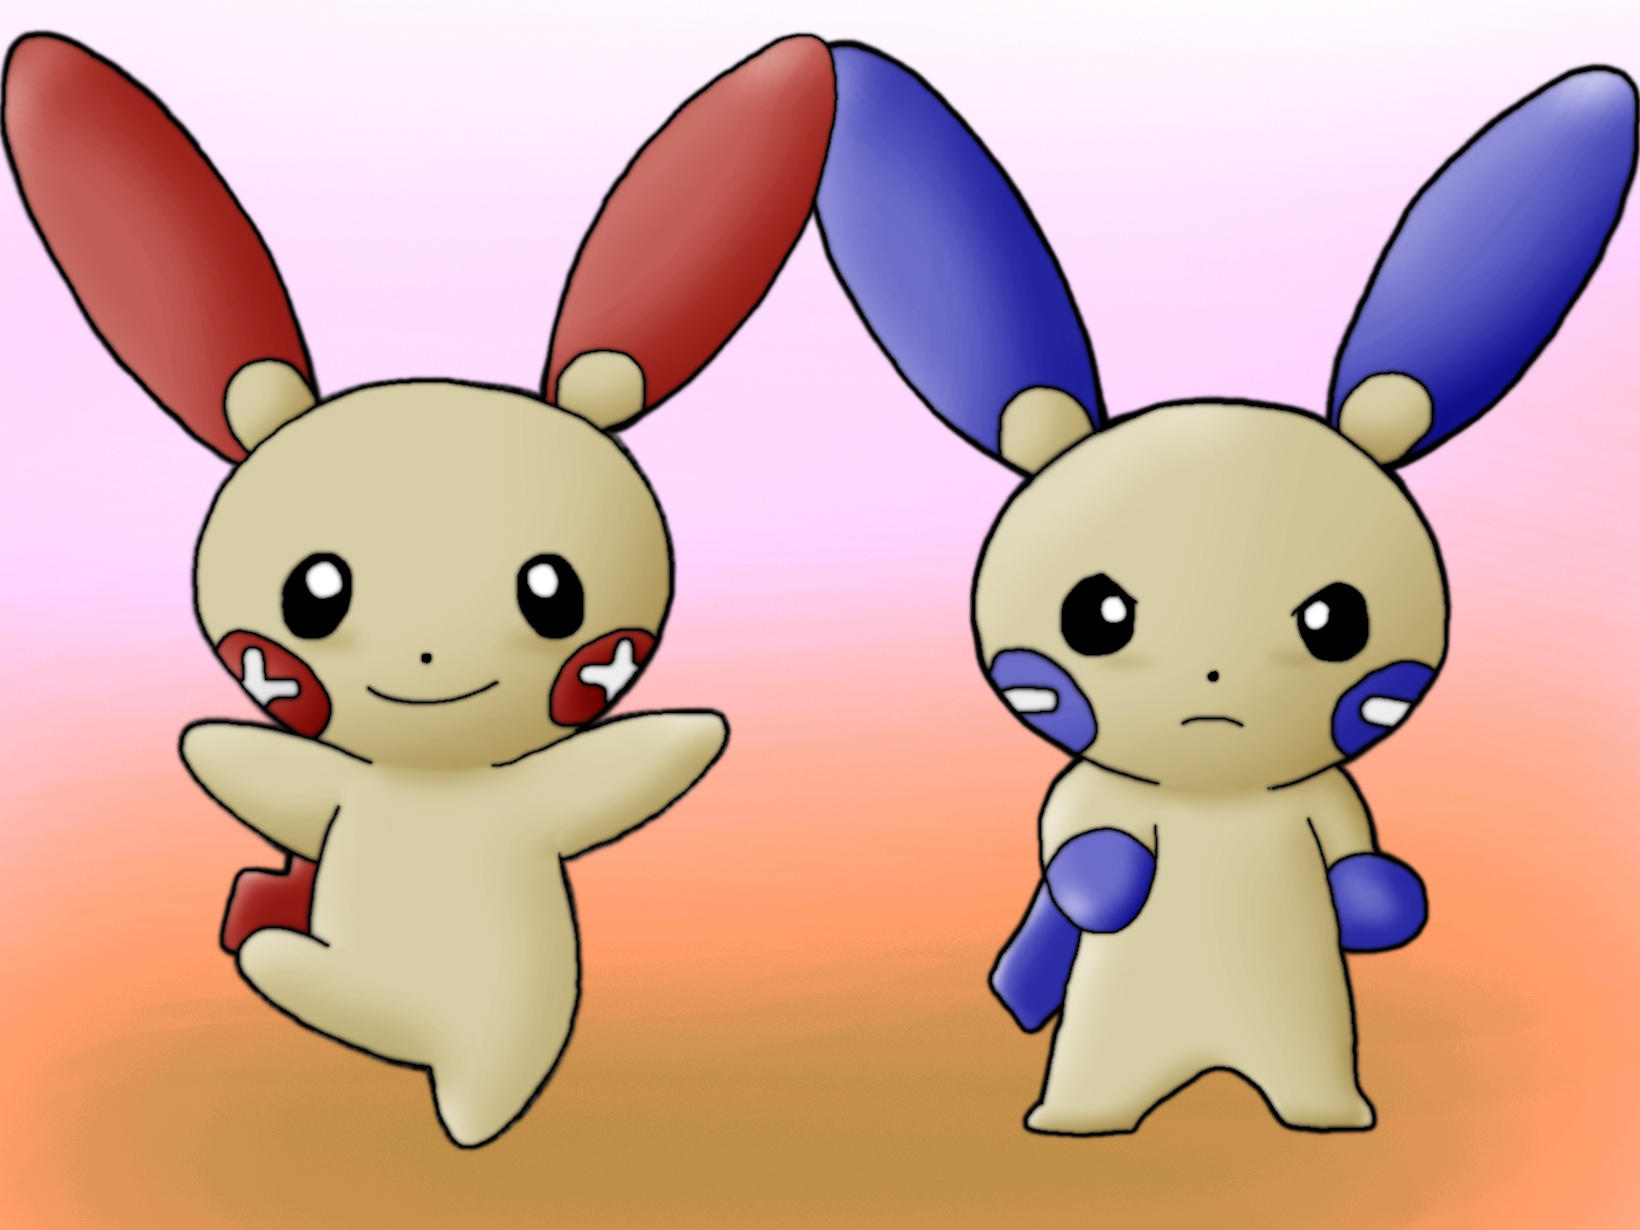 Plusle and Minun by Kenny21 on DeviantArt.